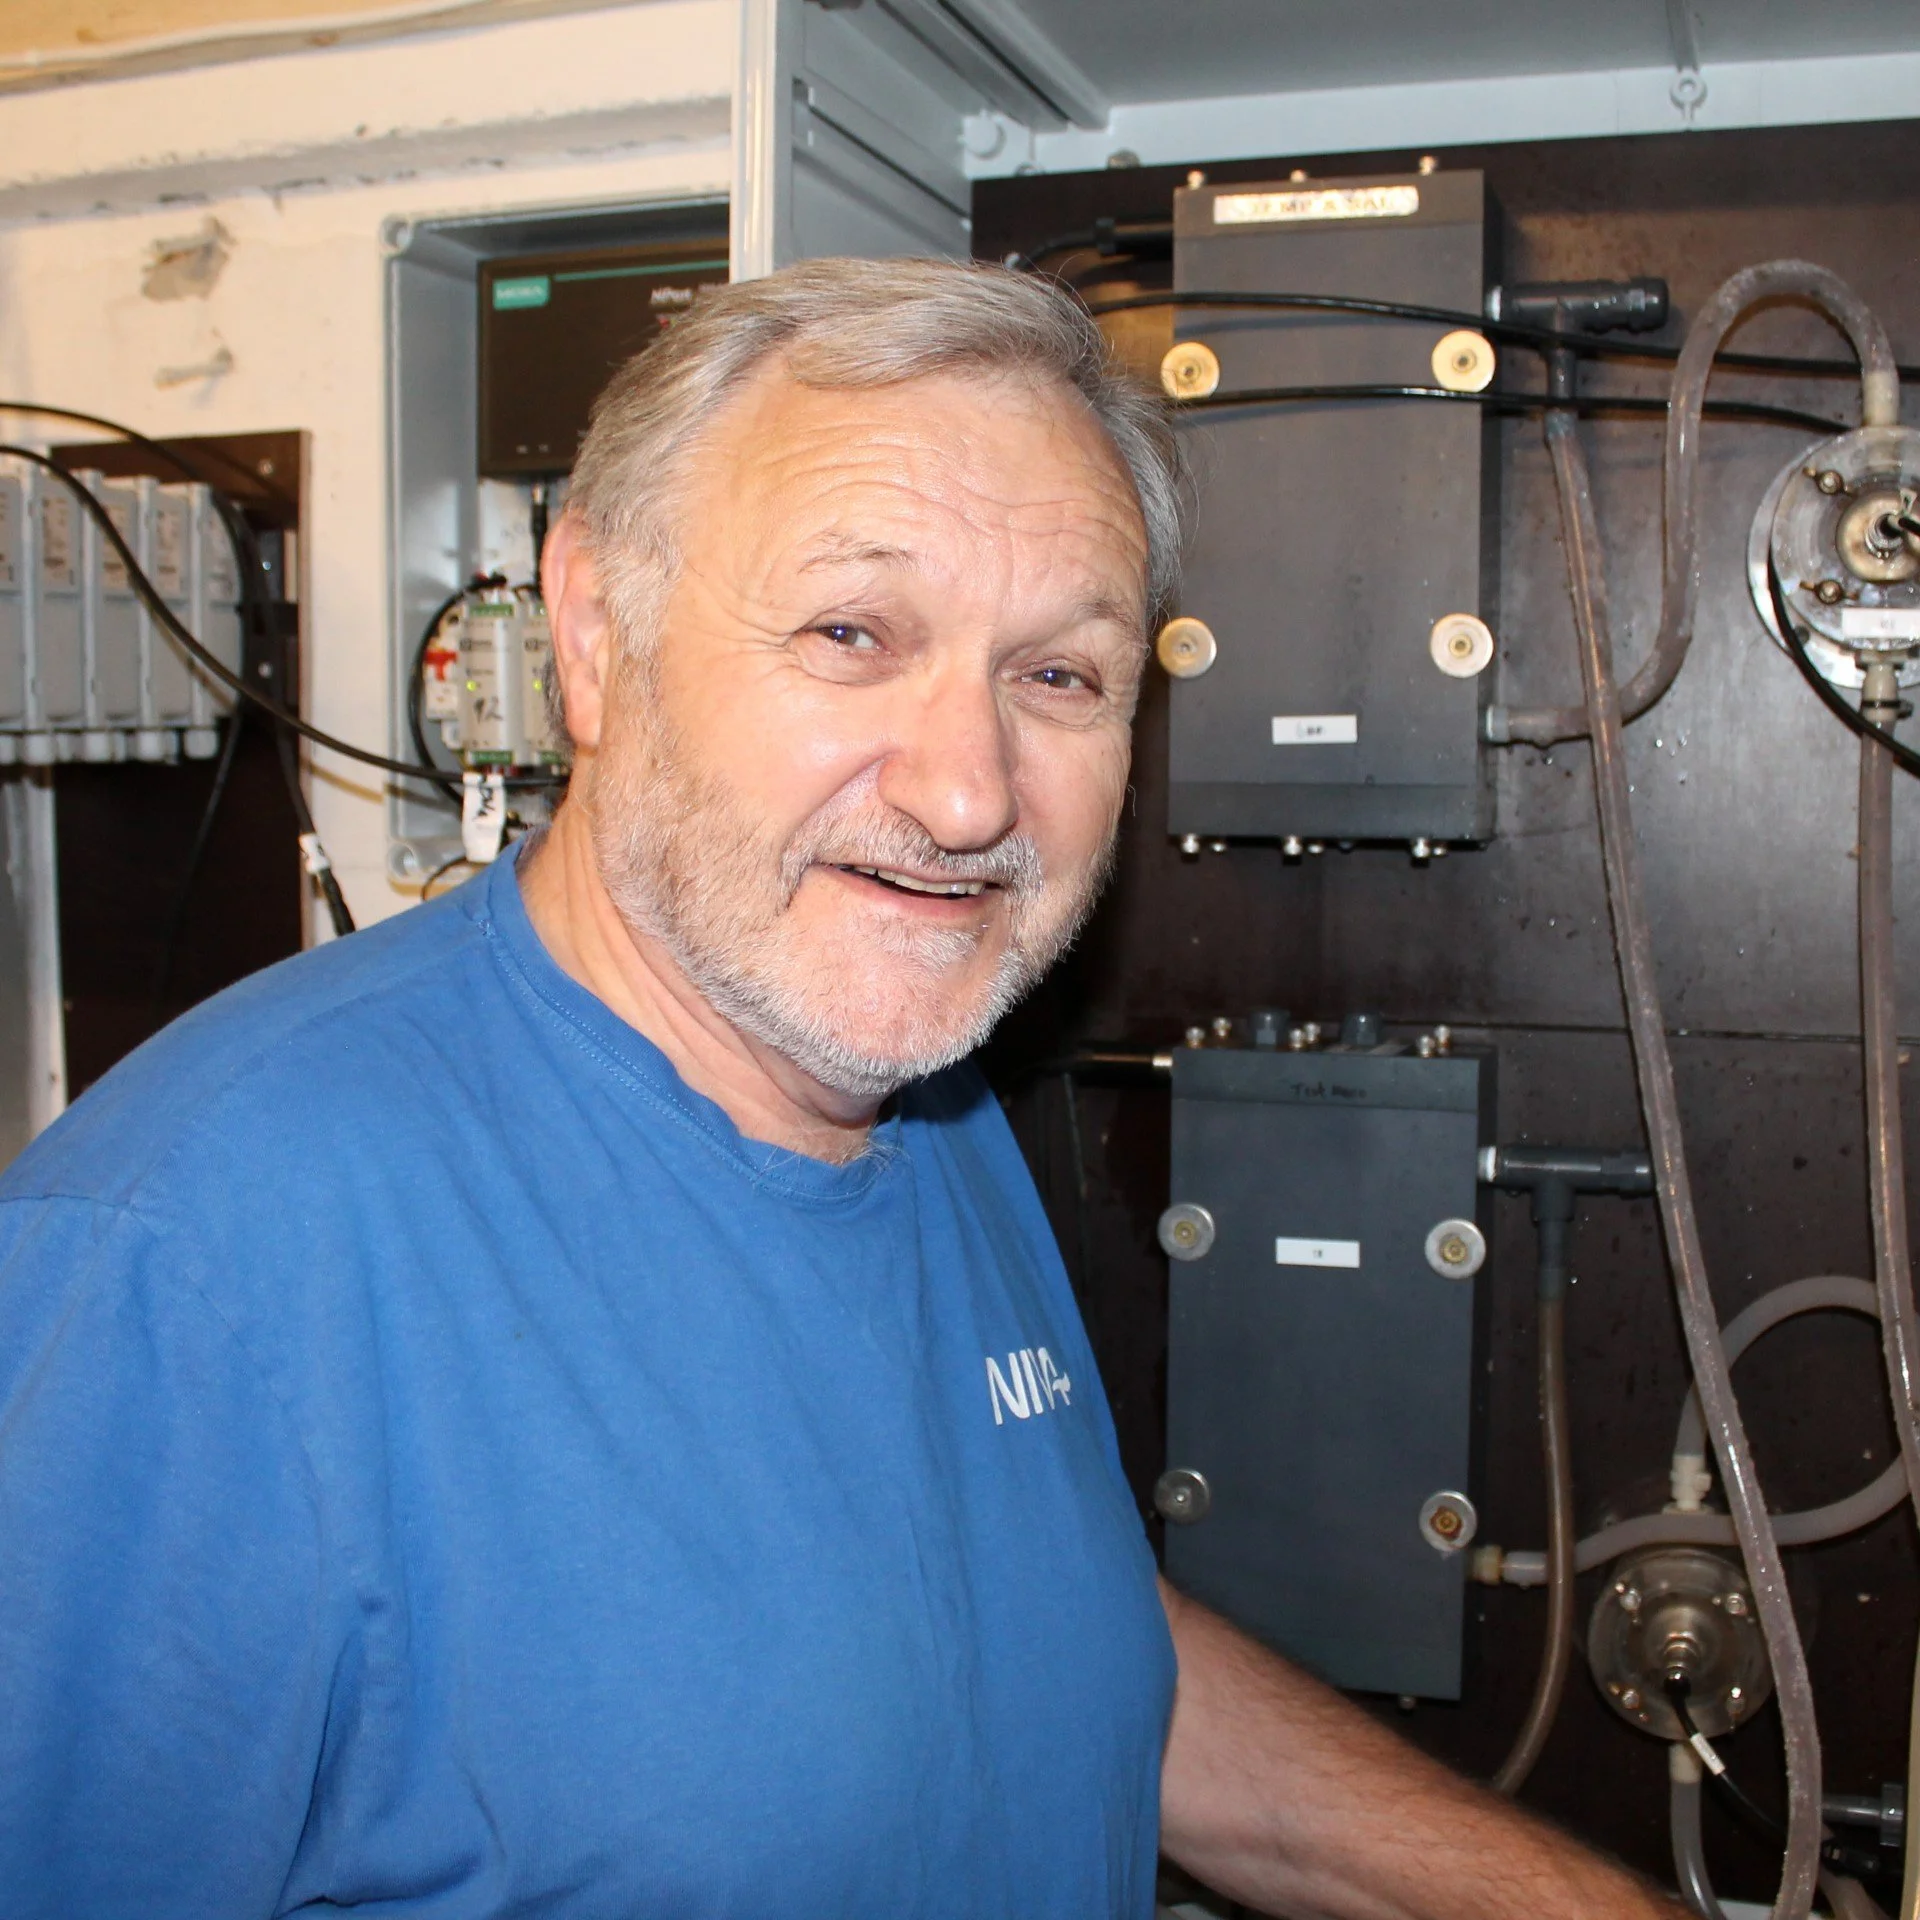 Kai Sørensen is standing in the engine room. He is wearing a blue shirt, and he is smiling.